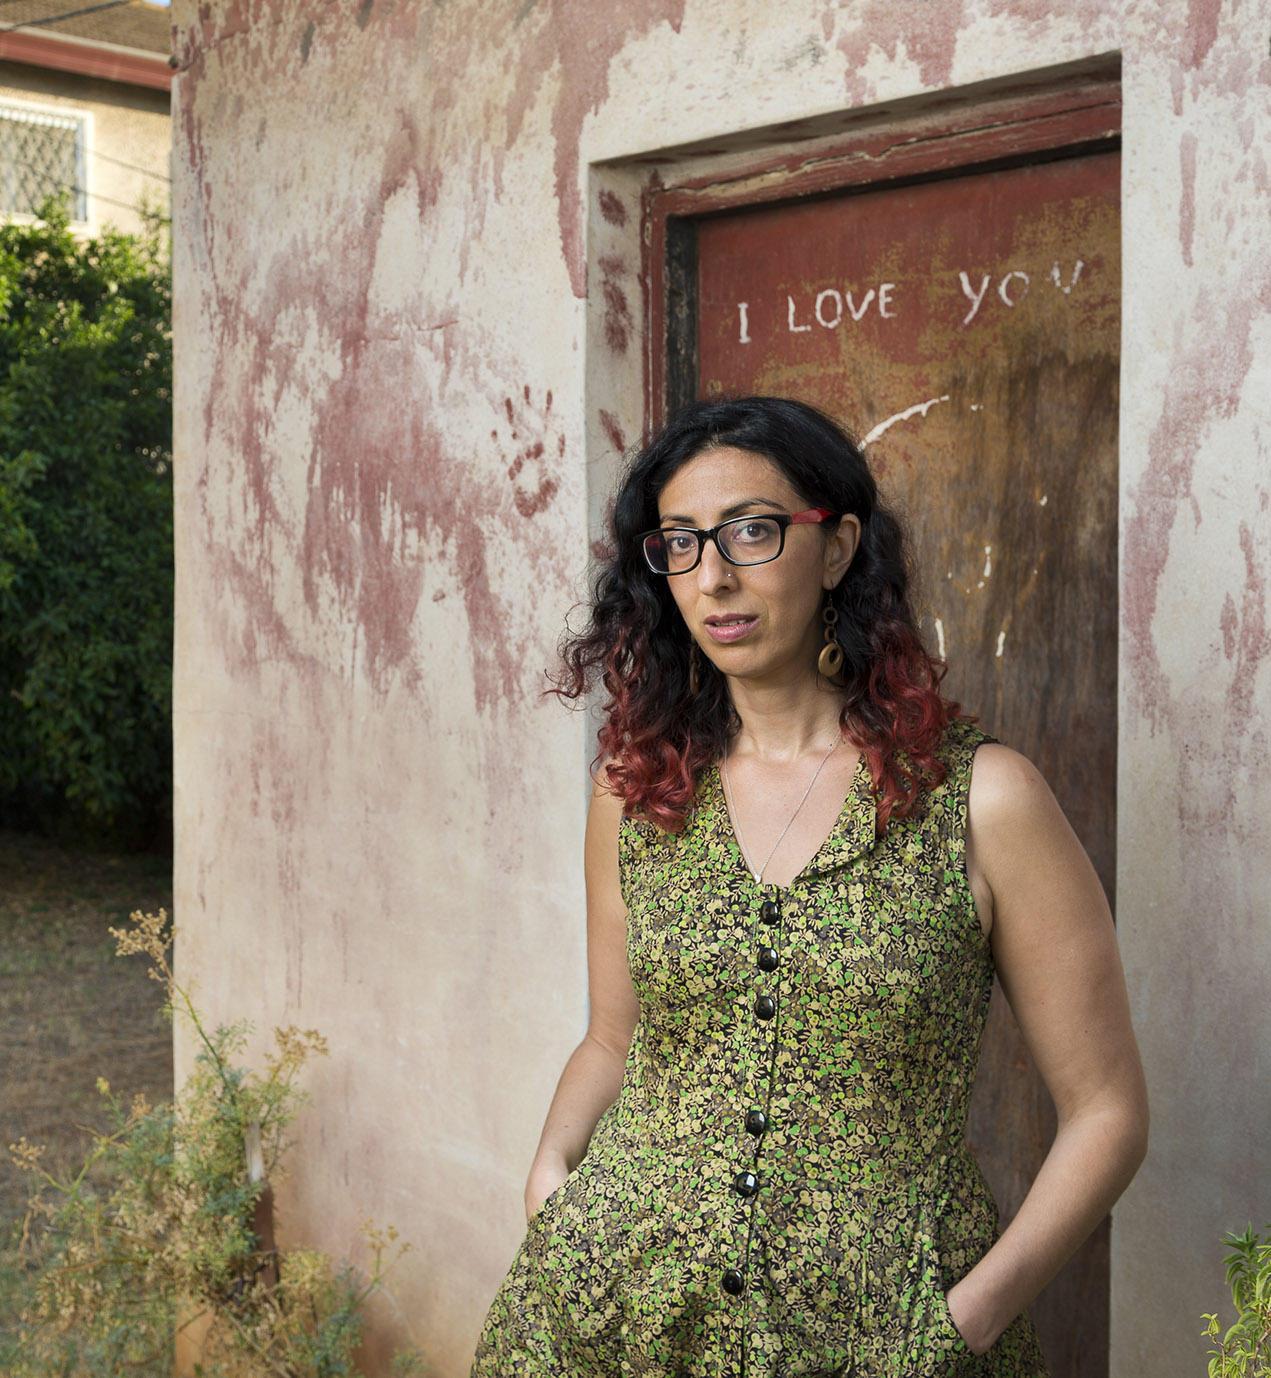 Portrait of Ayelet Tsabari looking serious, hands in pockets of a summer dress, standing in front of the door of a rustic building that has "I love you" scrawled on it